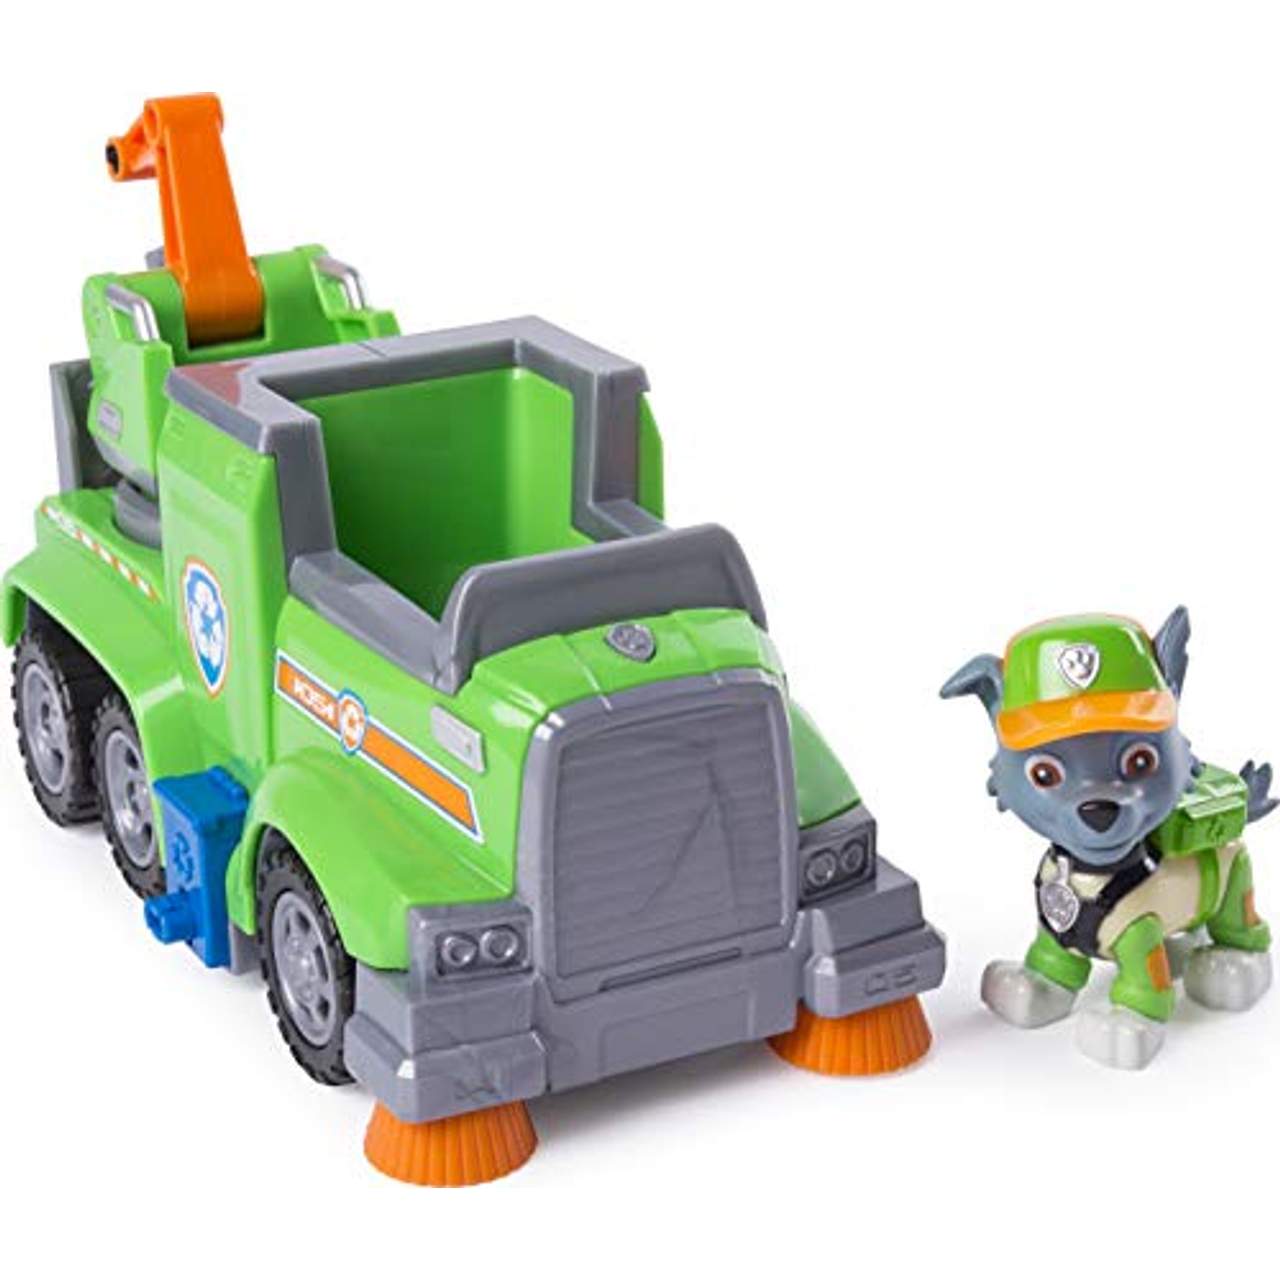 PAW Patrol 6044192 Ultimate Rescue Themed Vehicles